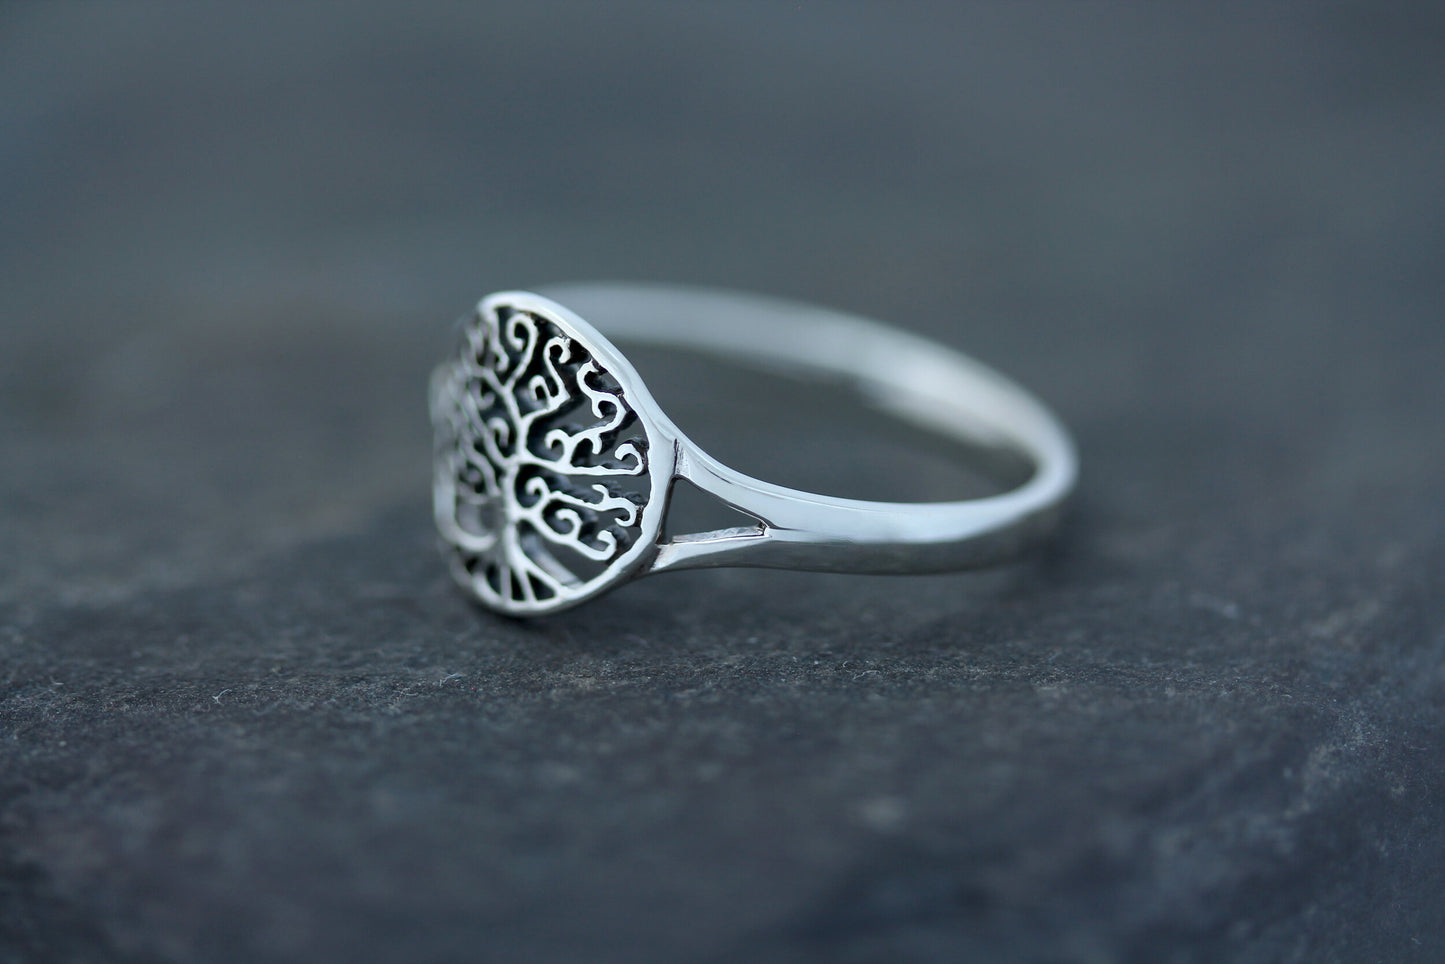 Tree of Life Ring - Swirly Branches